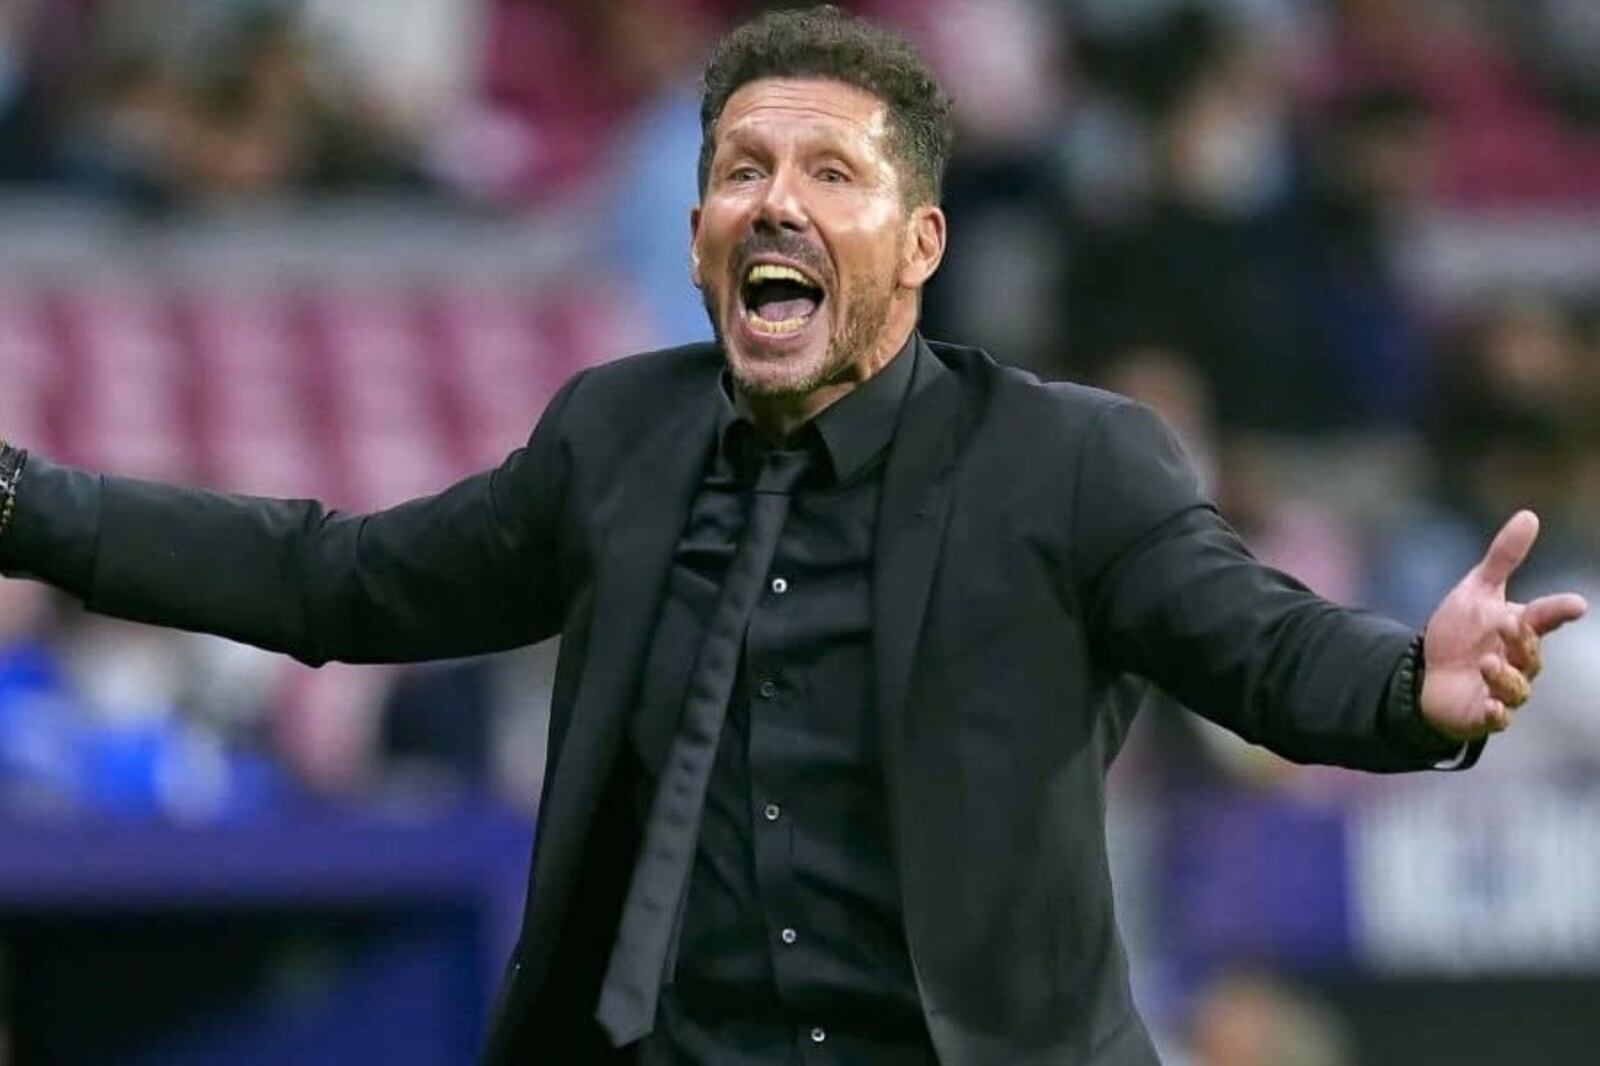 To win LaLiga, the three world-class players that Simeone asks to Atletico Madrid